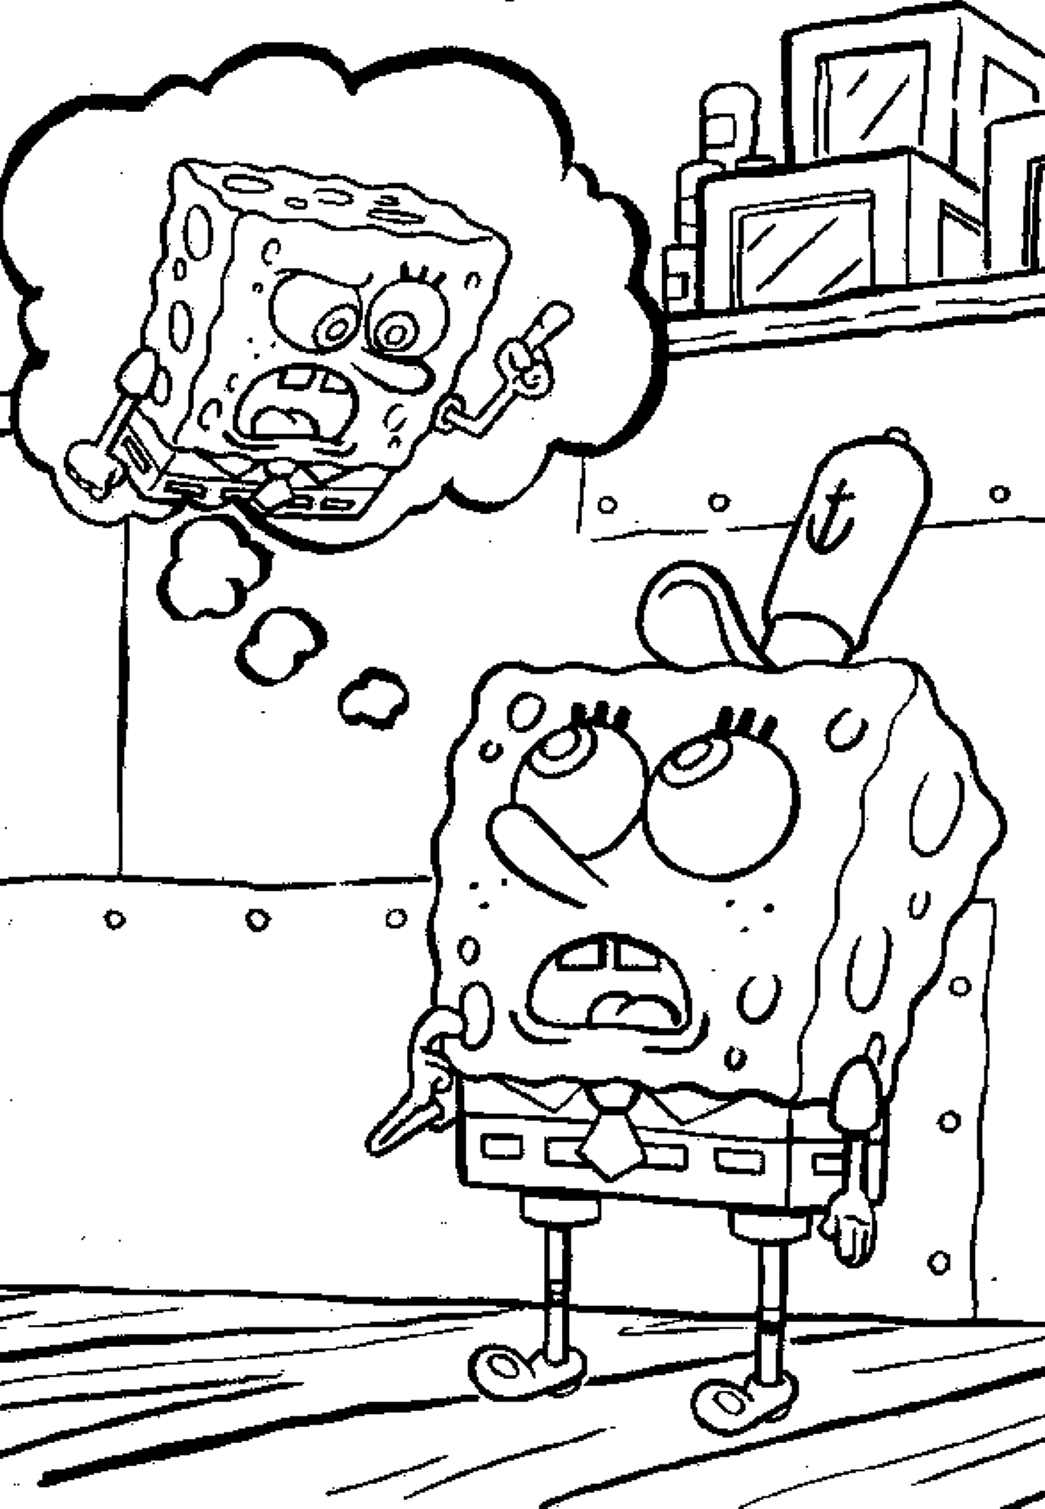 Spongebob S Free For Kids Coloring Page